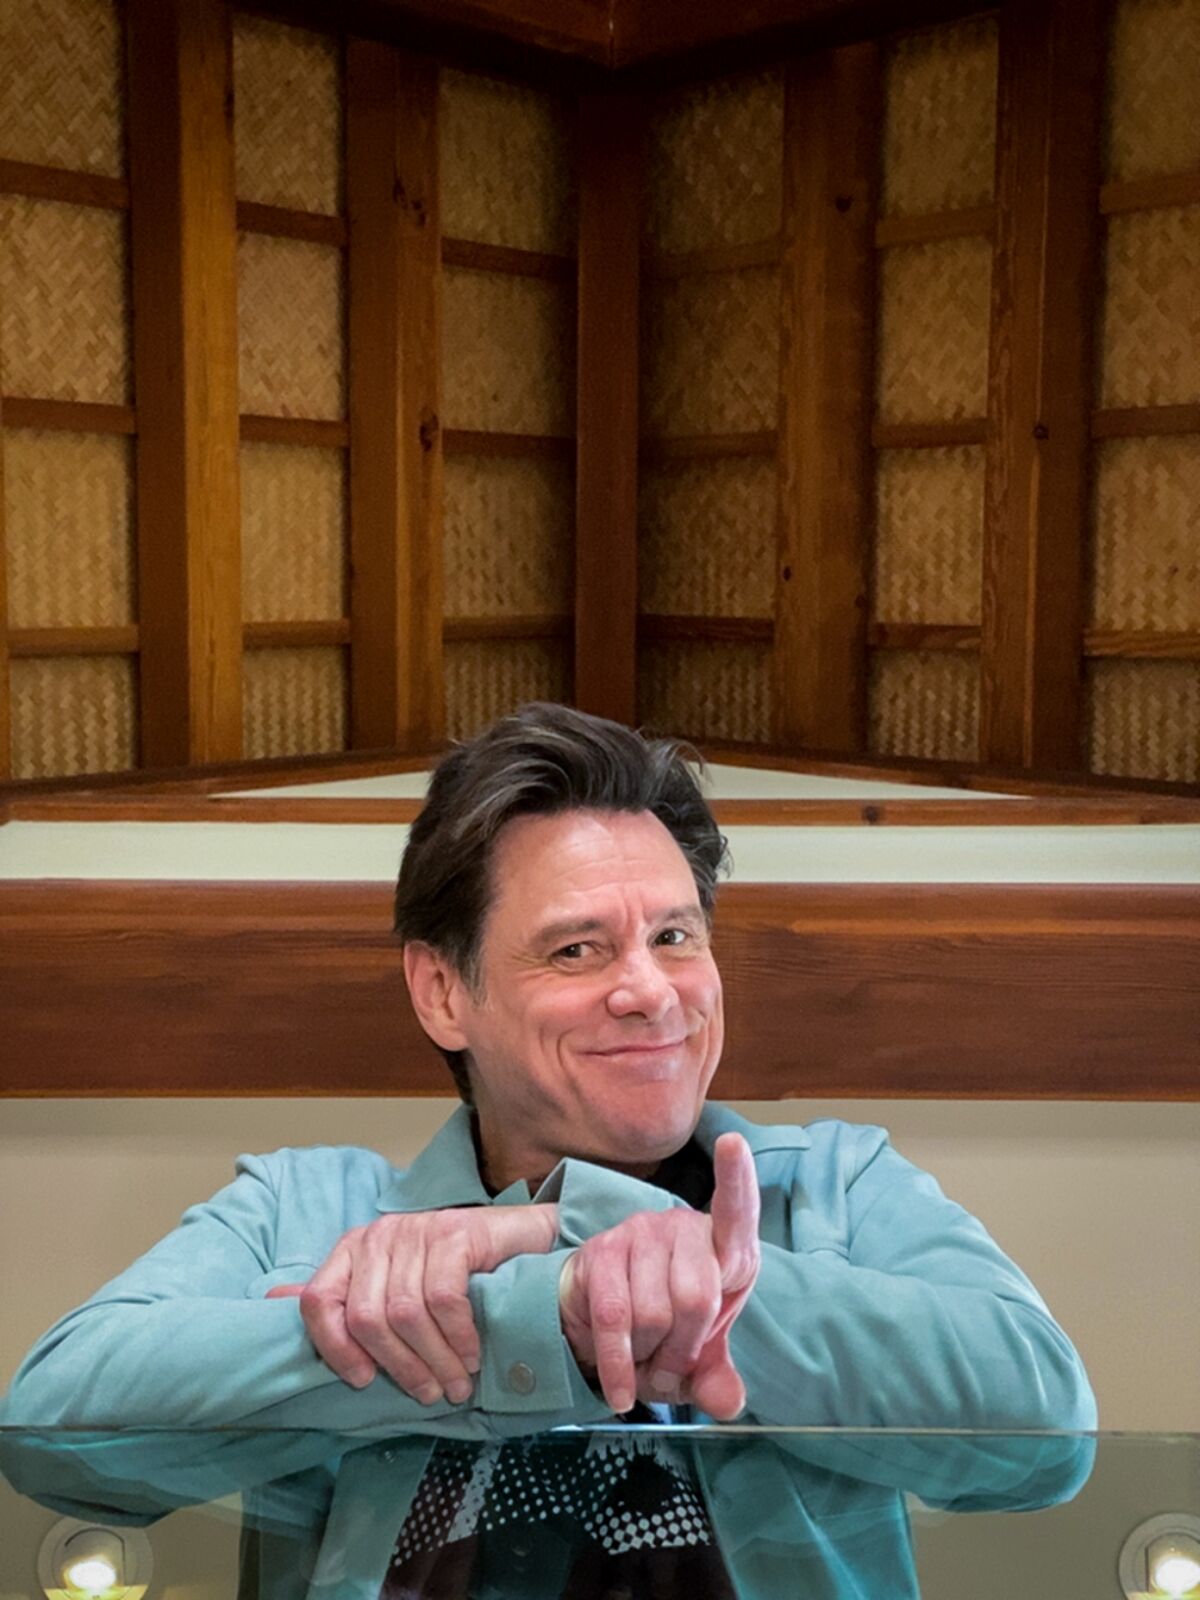 Jim Carrey in a blue button-up shirt, pointing his index finger upward